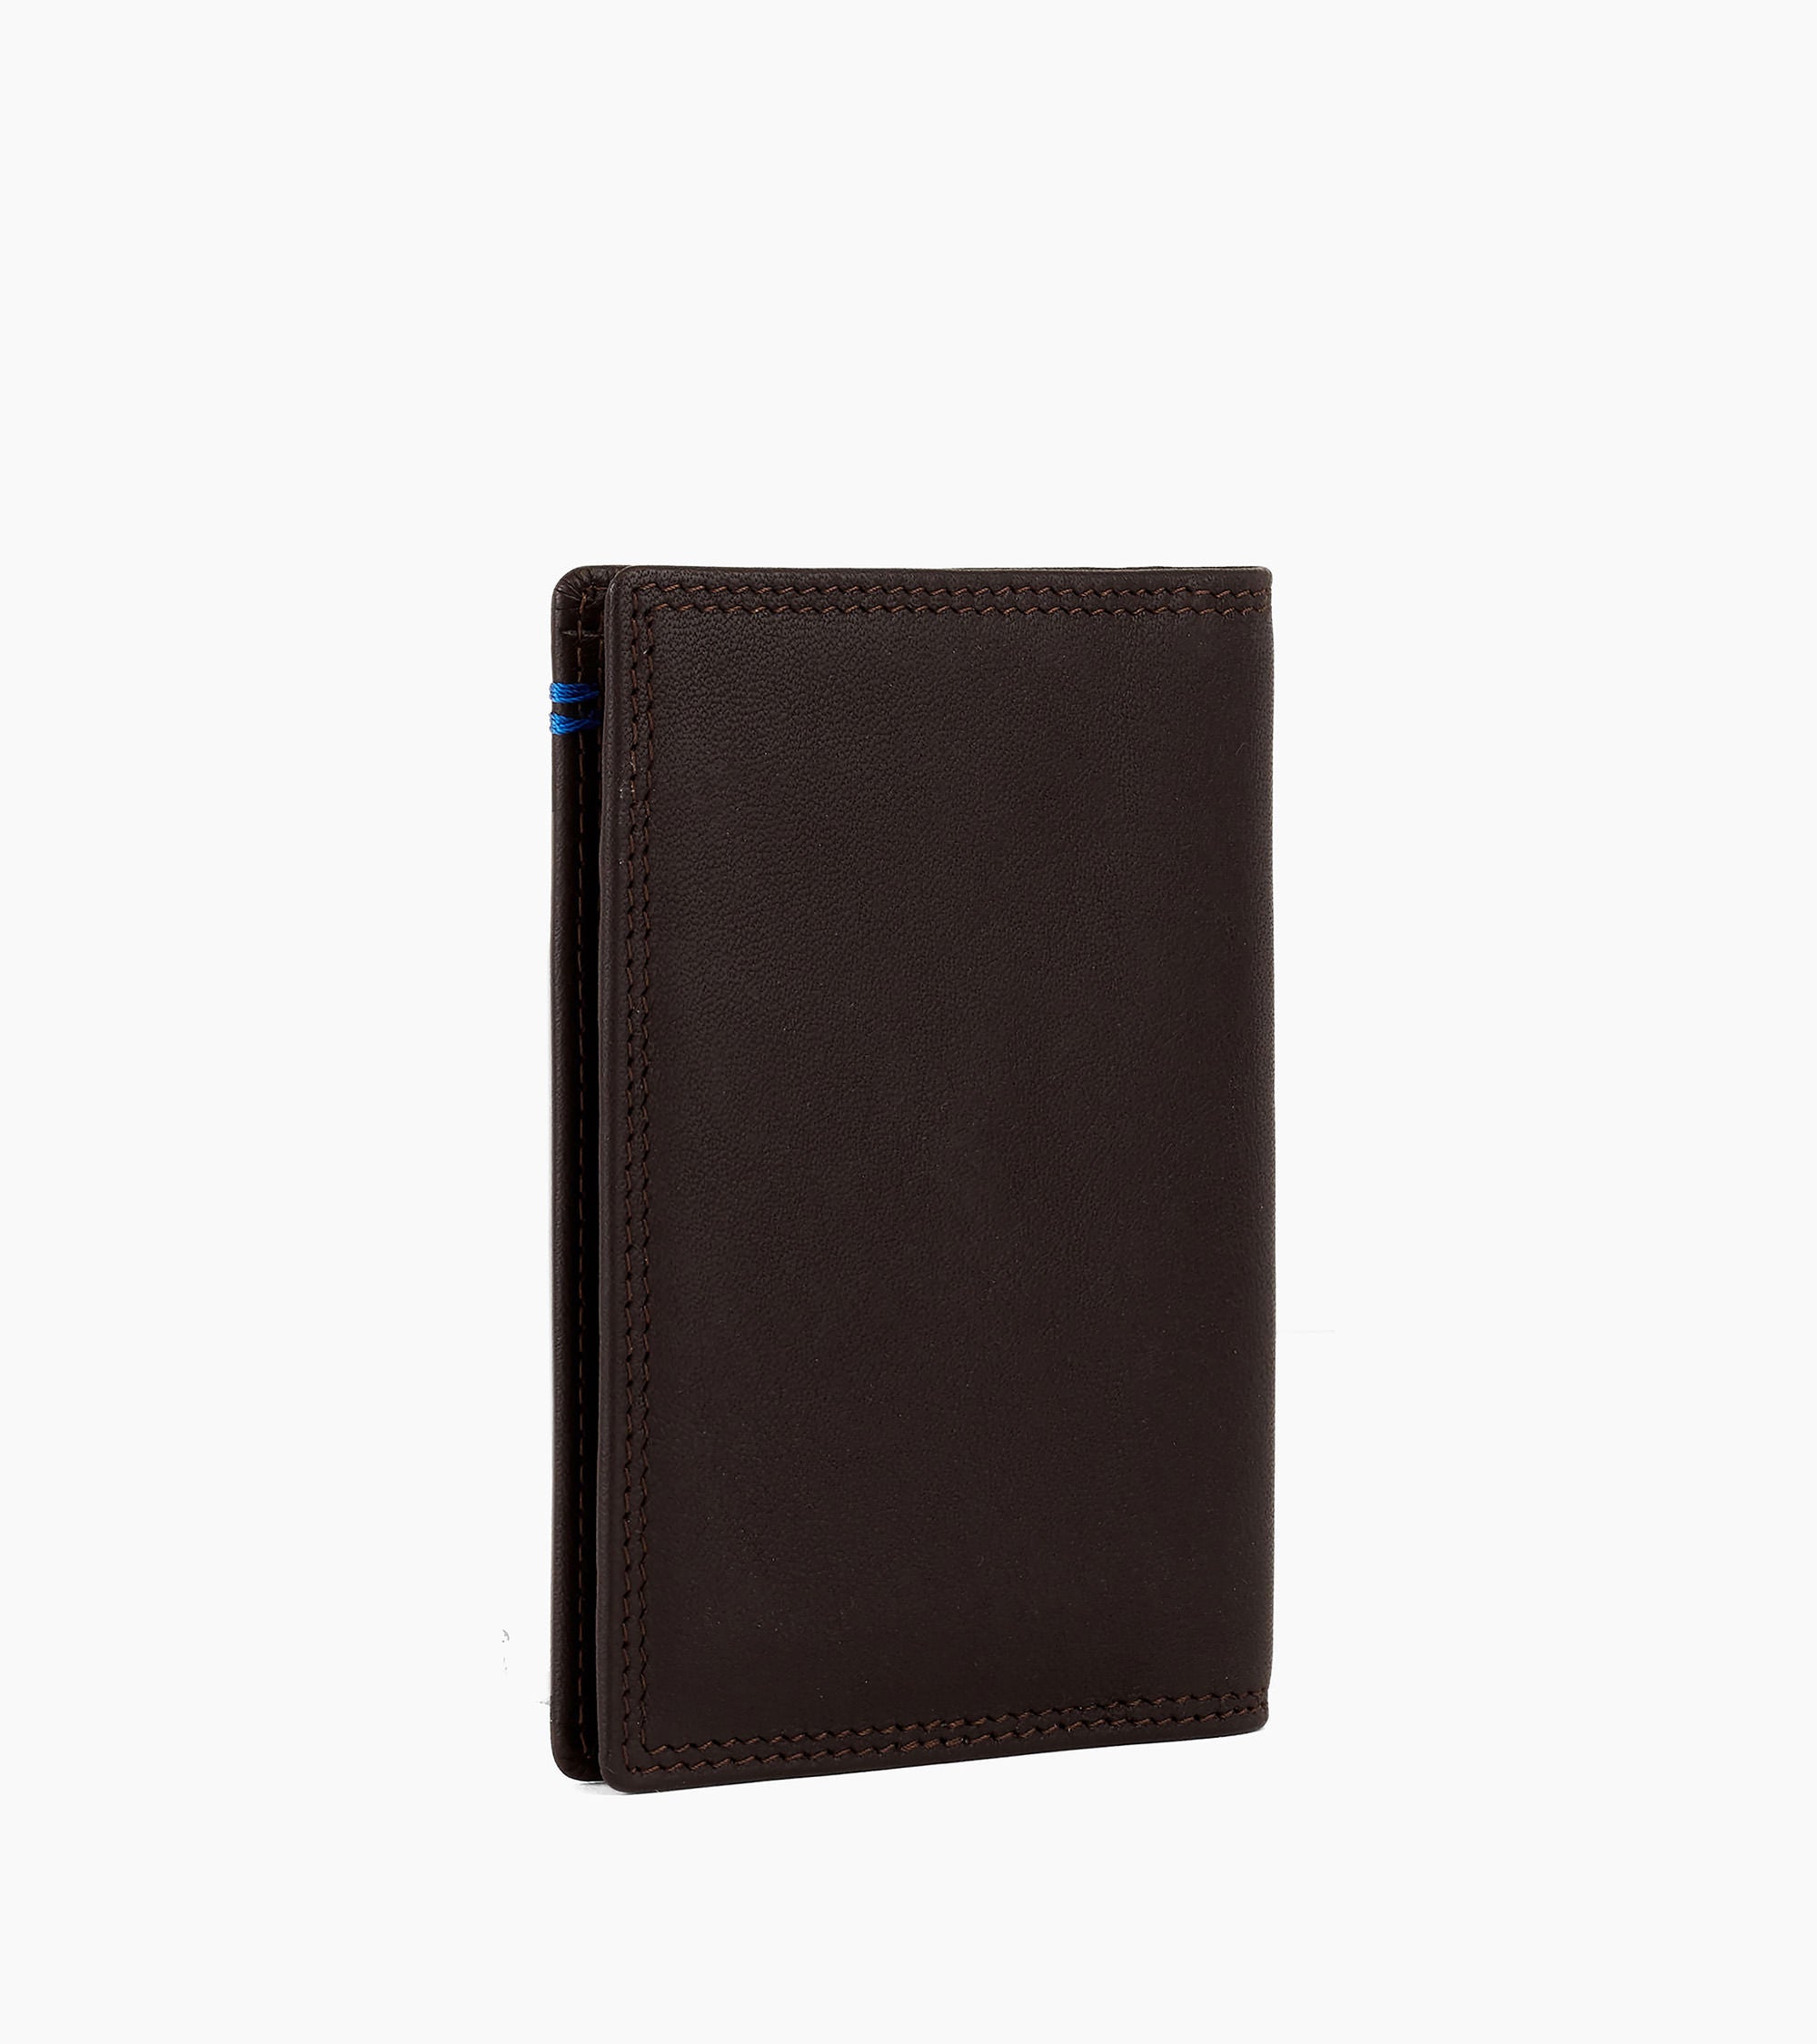 Martin smooth leather cardholder